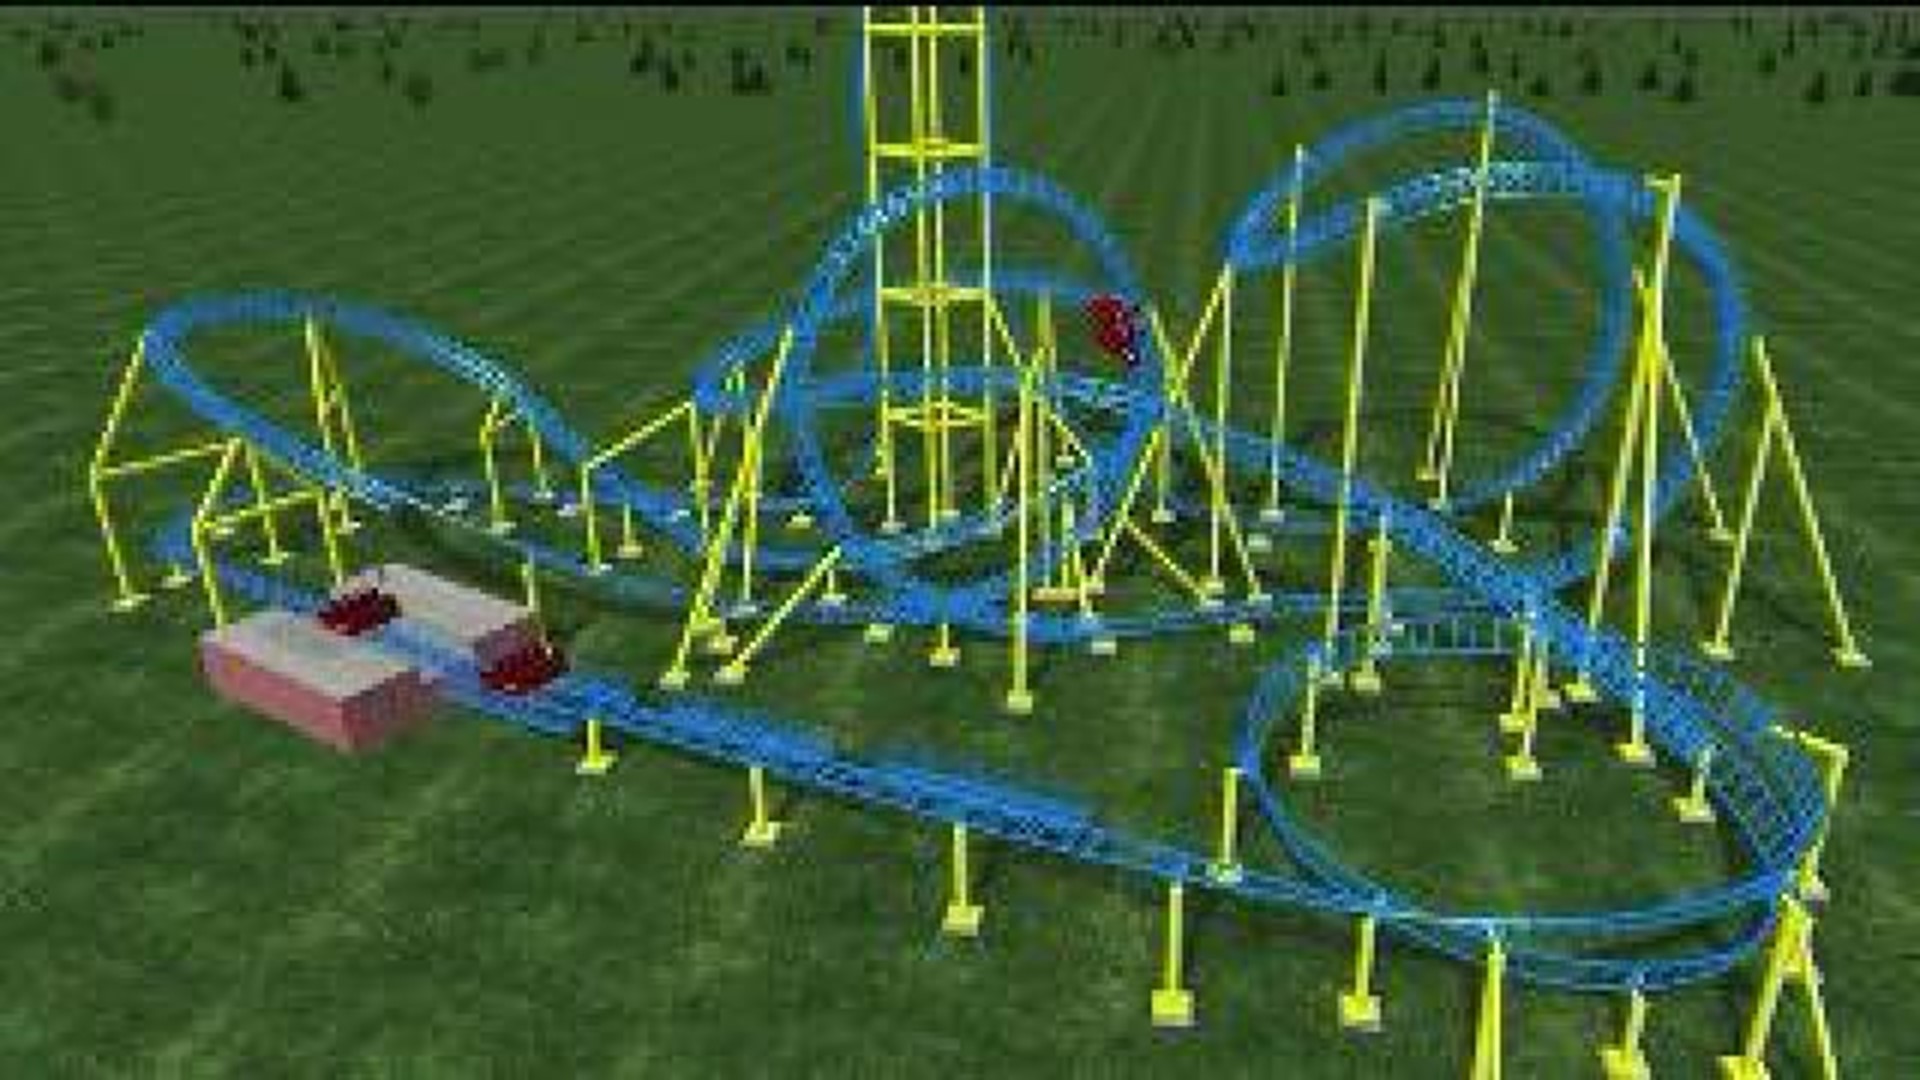 Sky-High Coaster to Cruise Through Knoebels in 2015 | wnep.com